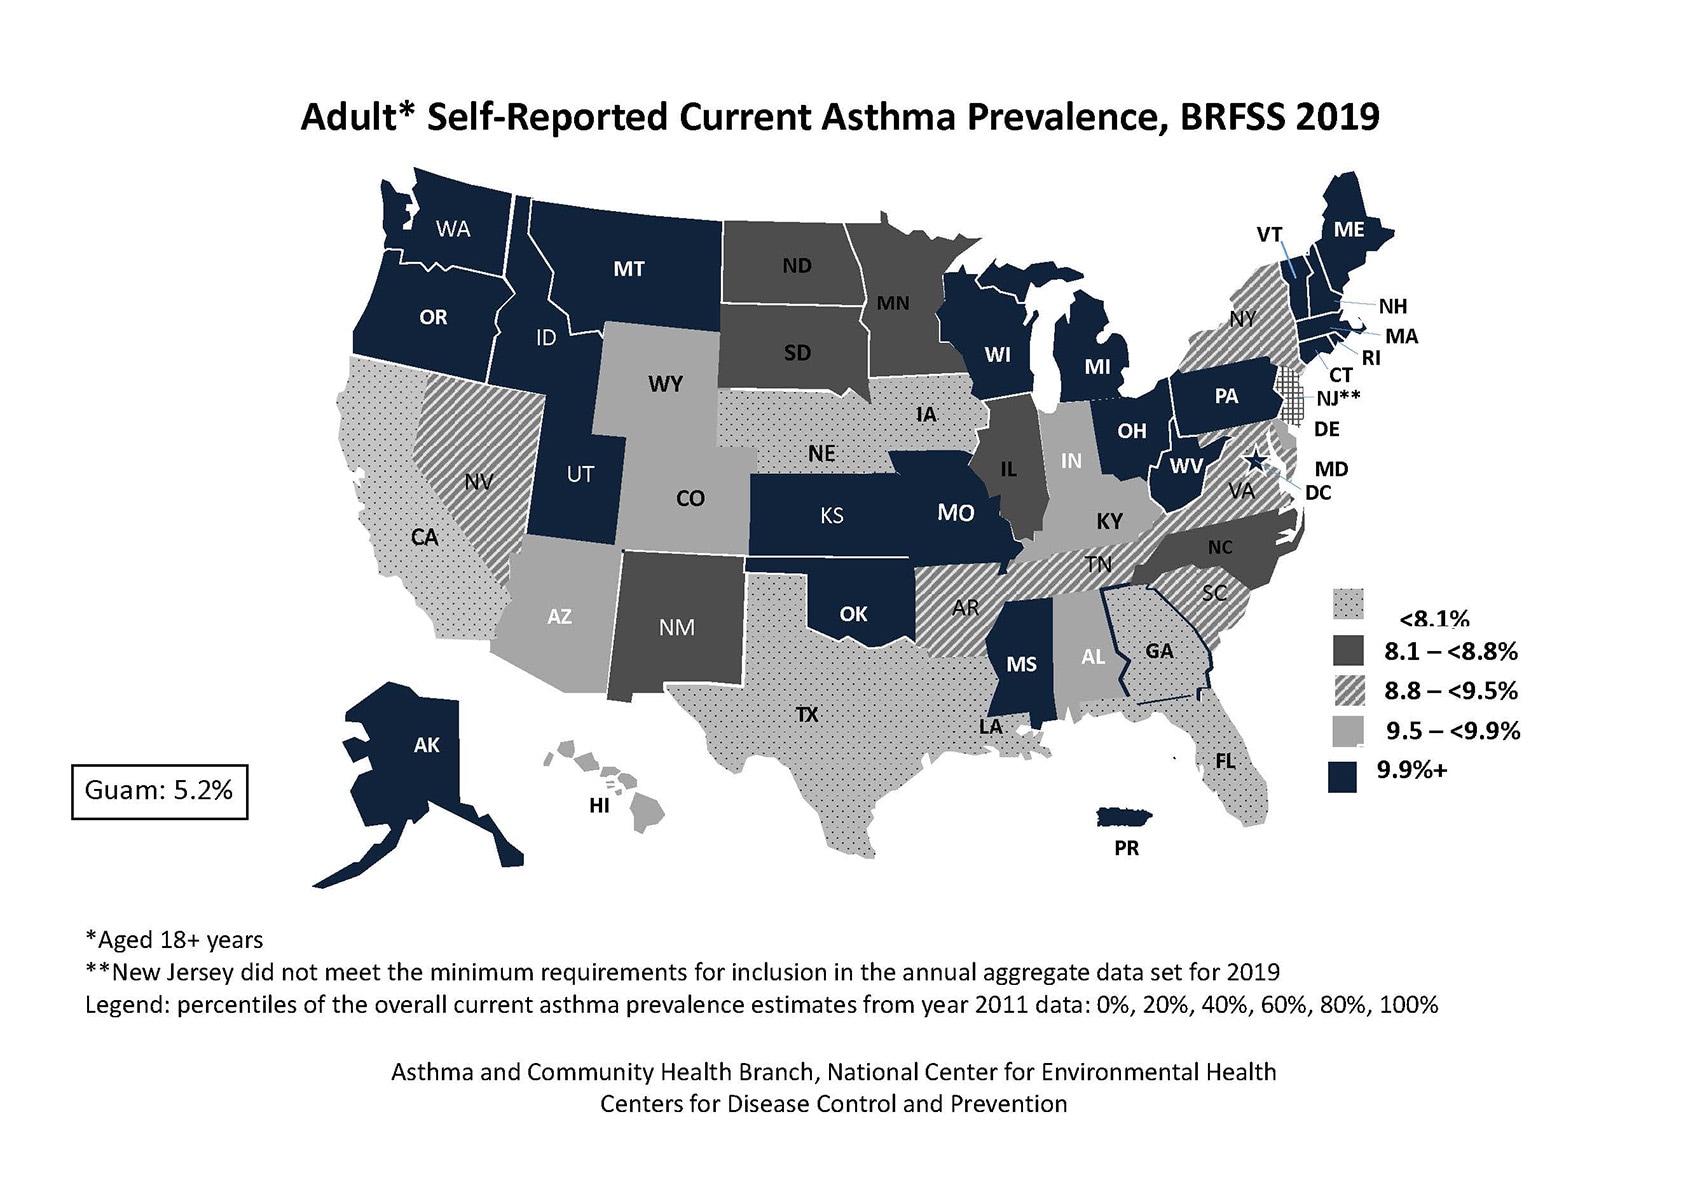 Black and white U.S. map showing adult self-reported current asthma prevalence by state for BRFSS 2019